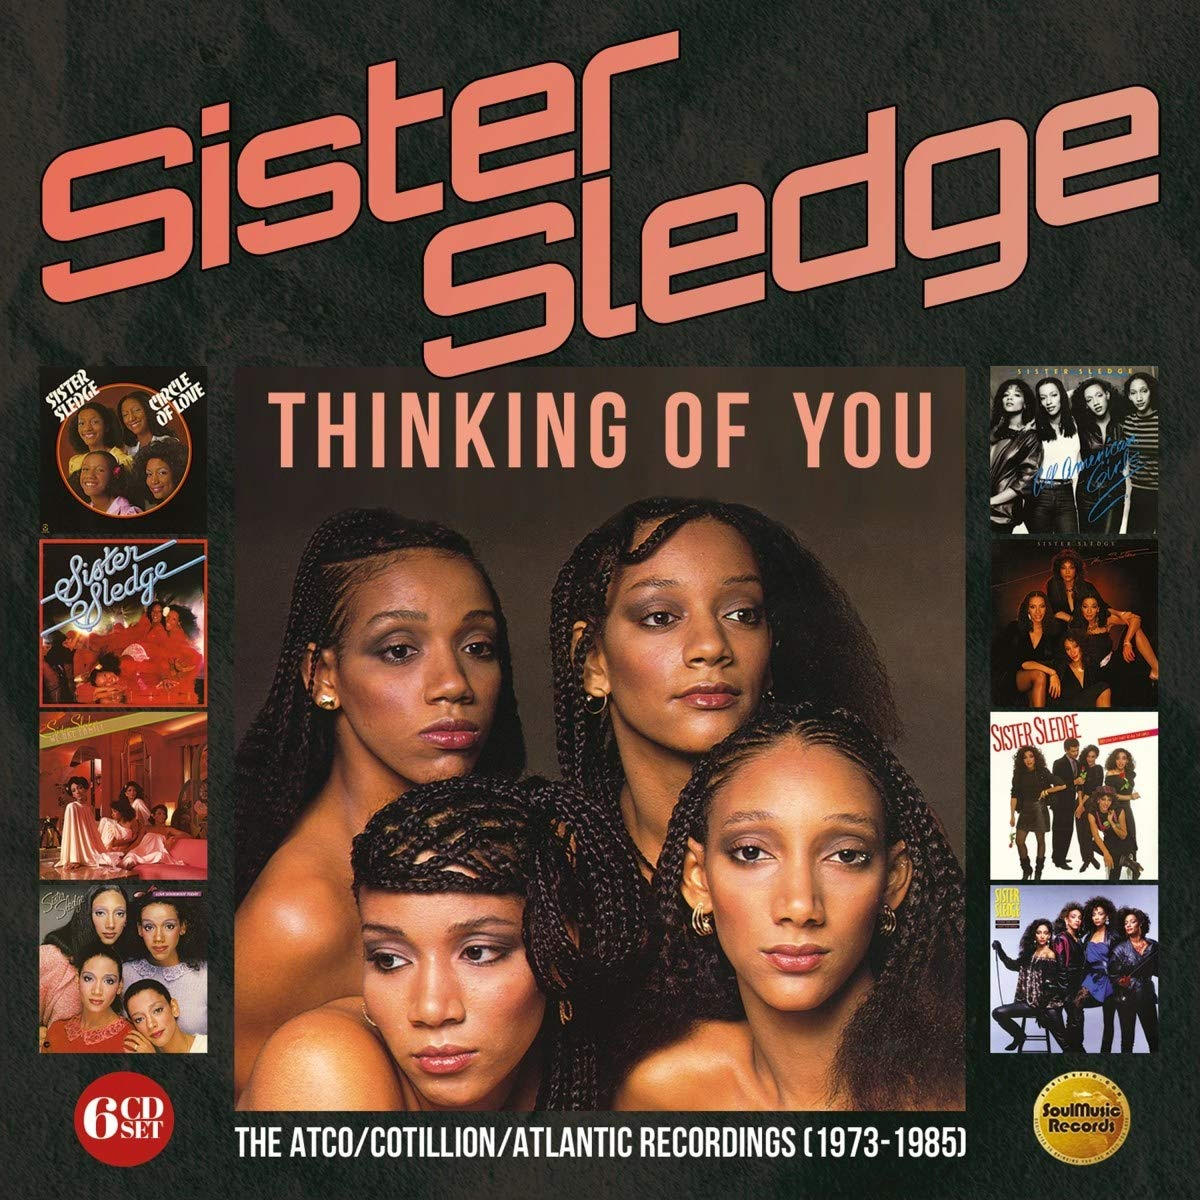 Sister Sledge - Thinking Of You – The Atco / Cotillion / Atlantic Recordings (1973-1985) (6 CD Box Set - Imported)